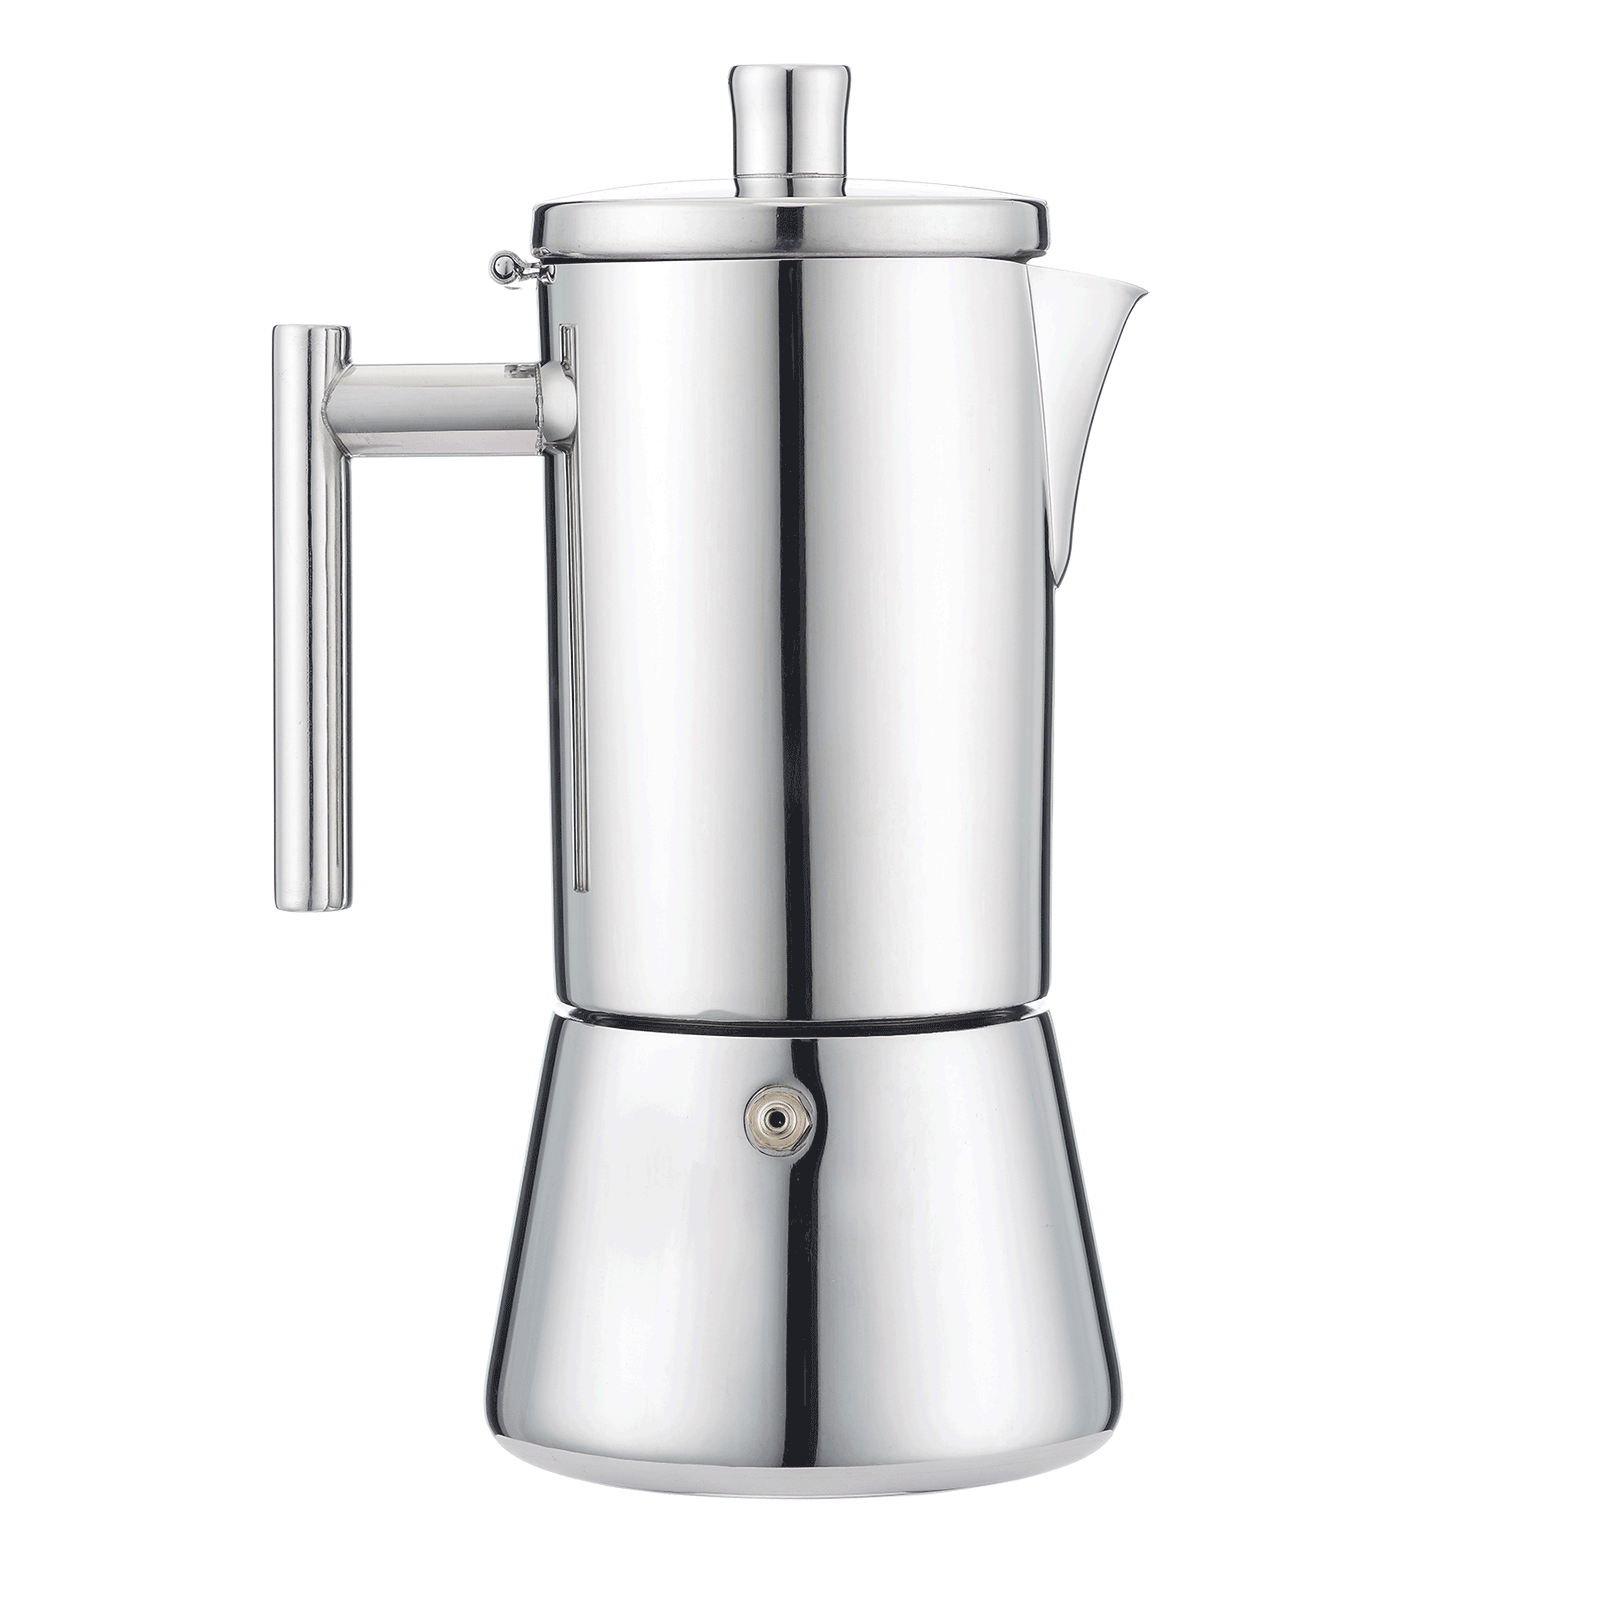 Tebru Stainless Steel Moka Pot Stovetop Espresso Coffee Maker with Safety Valve 4 Cups, Stainless Steel Espresso Maker,Moka Pot, Silver